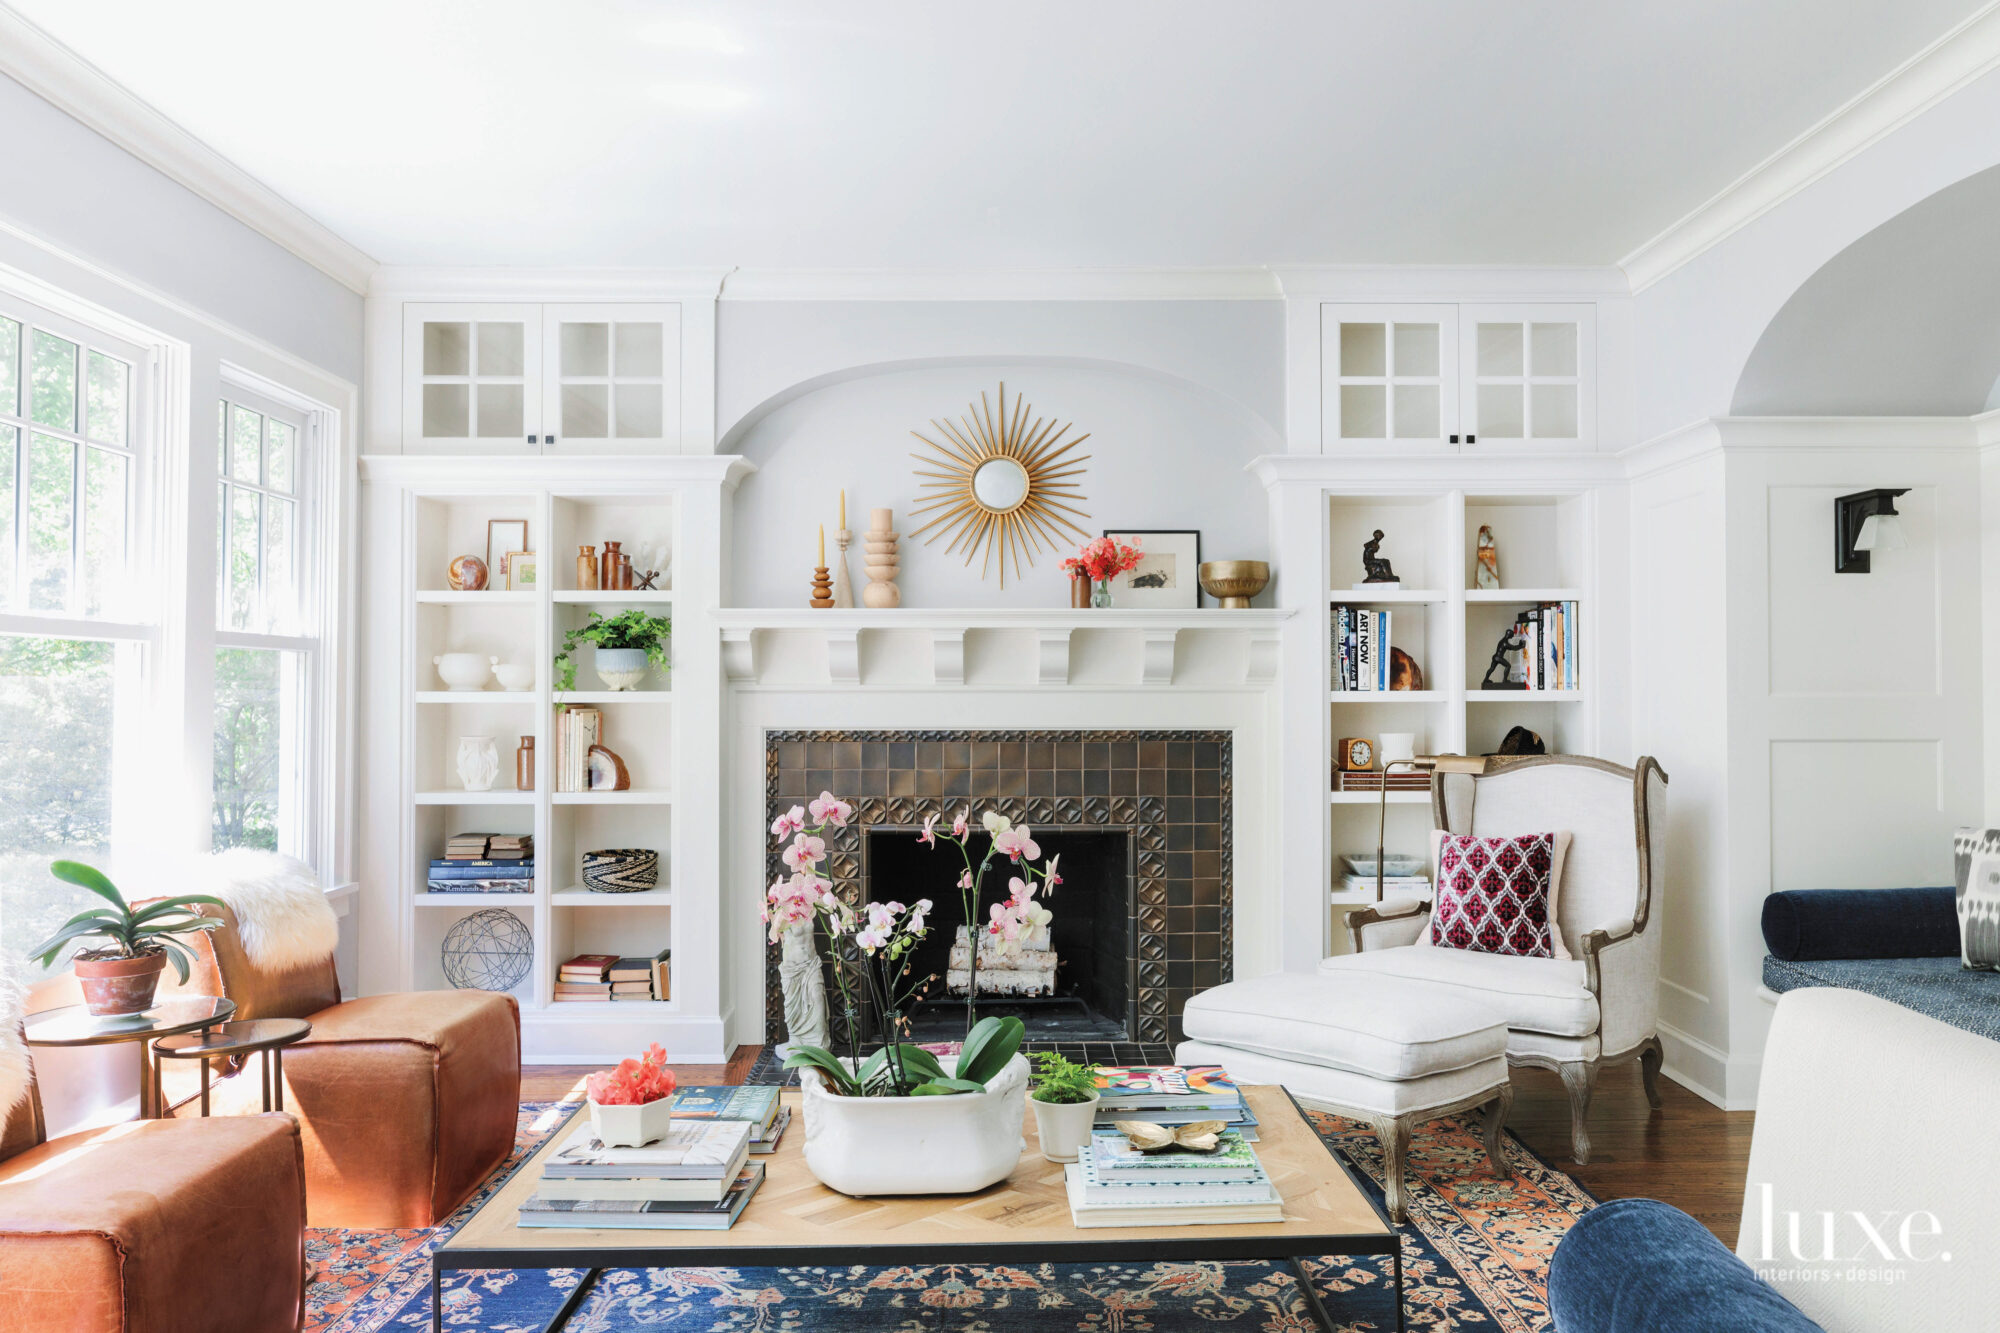 Built-in shelves surround the fireplace in the living room